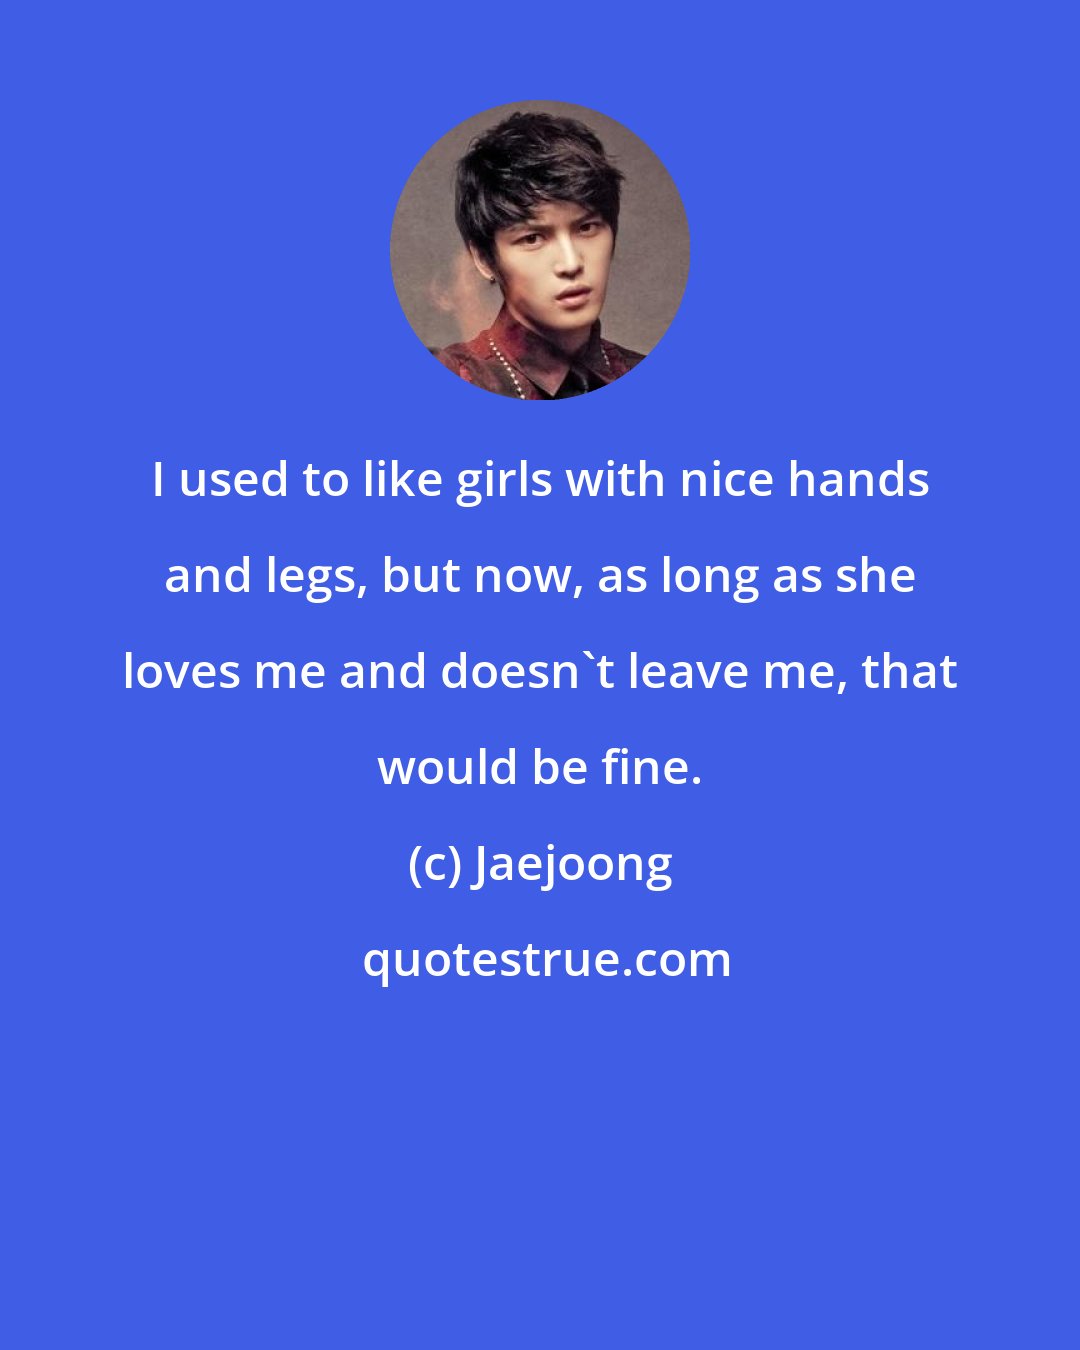 Jaejoong: I used to like girls with nice hands and legs, but now, as long as she loves me and doesn't leave me, that would be fine.